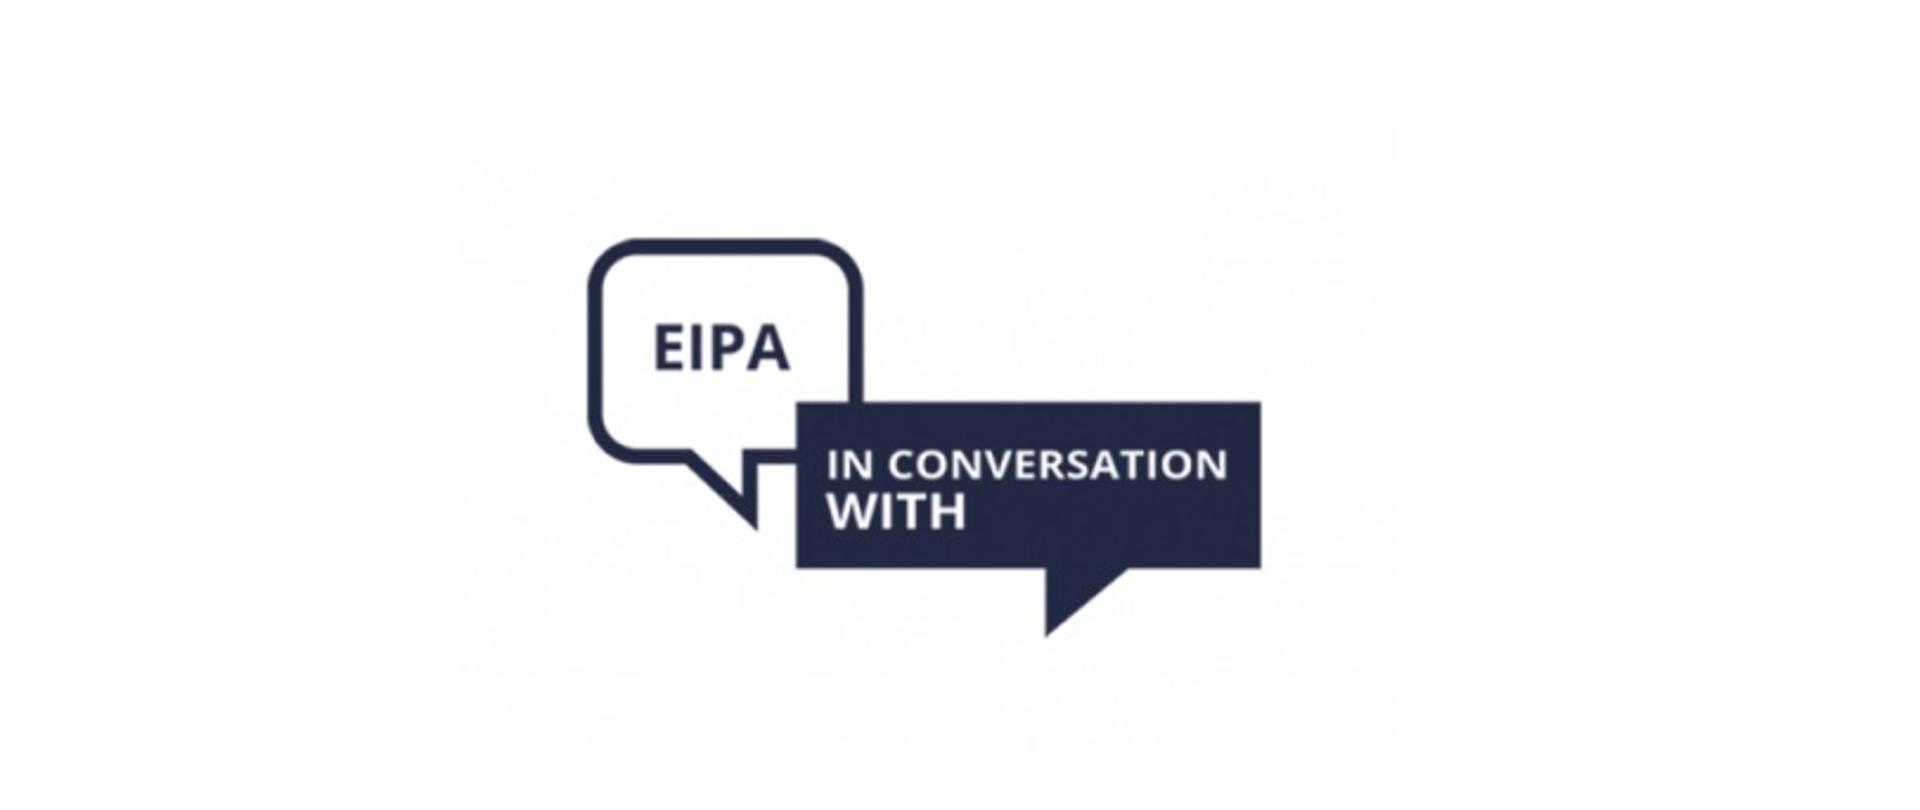 Napis: EIPA in conversation with 